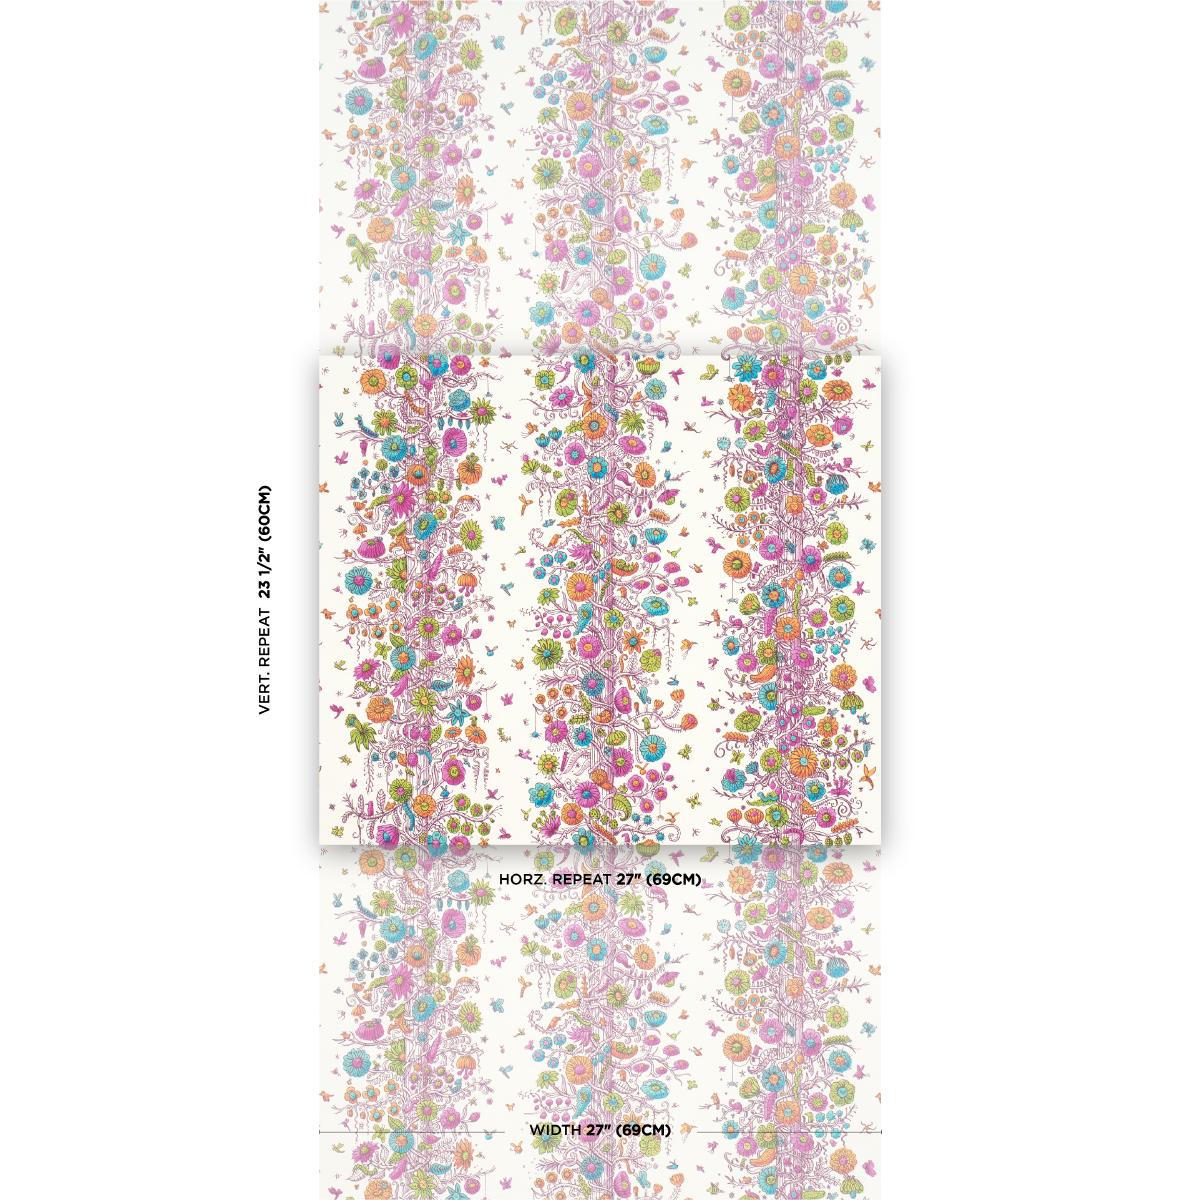 Schumacher Edward Steed's Towers Of Flowers Wallpaper